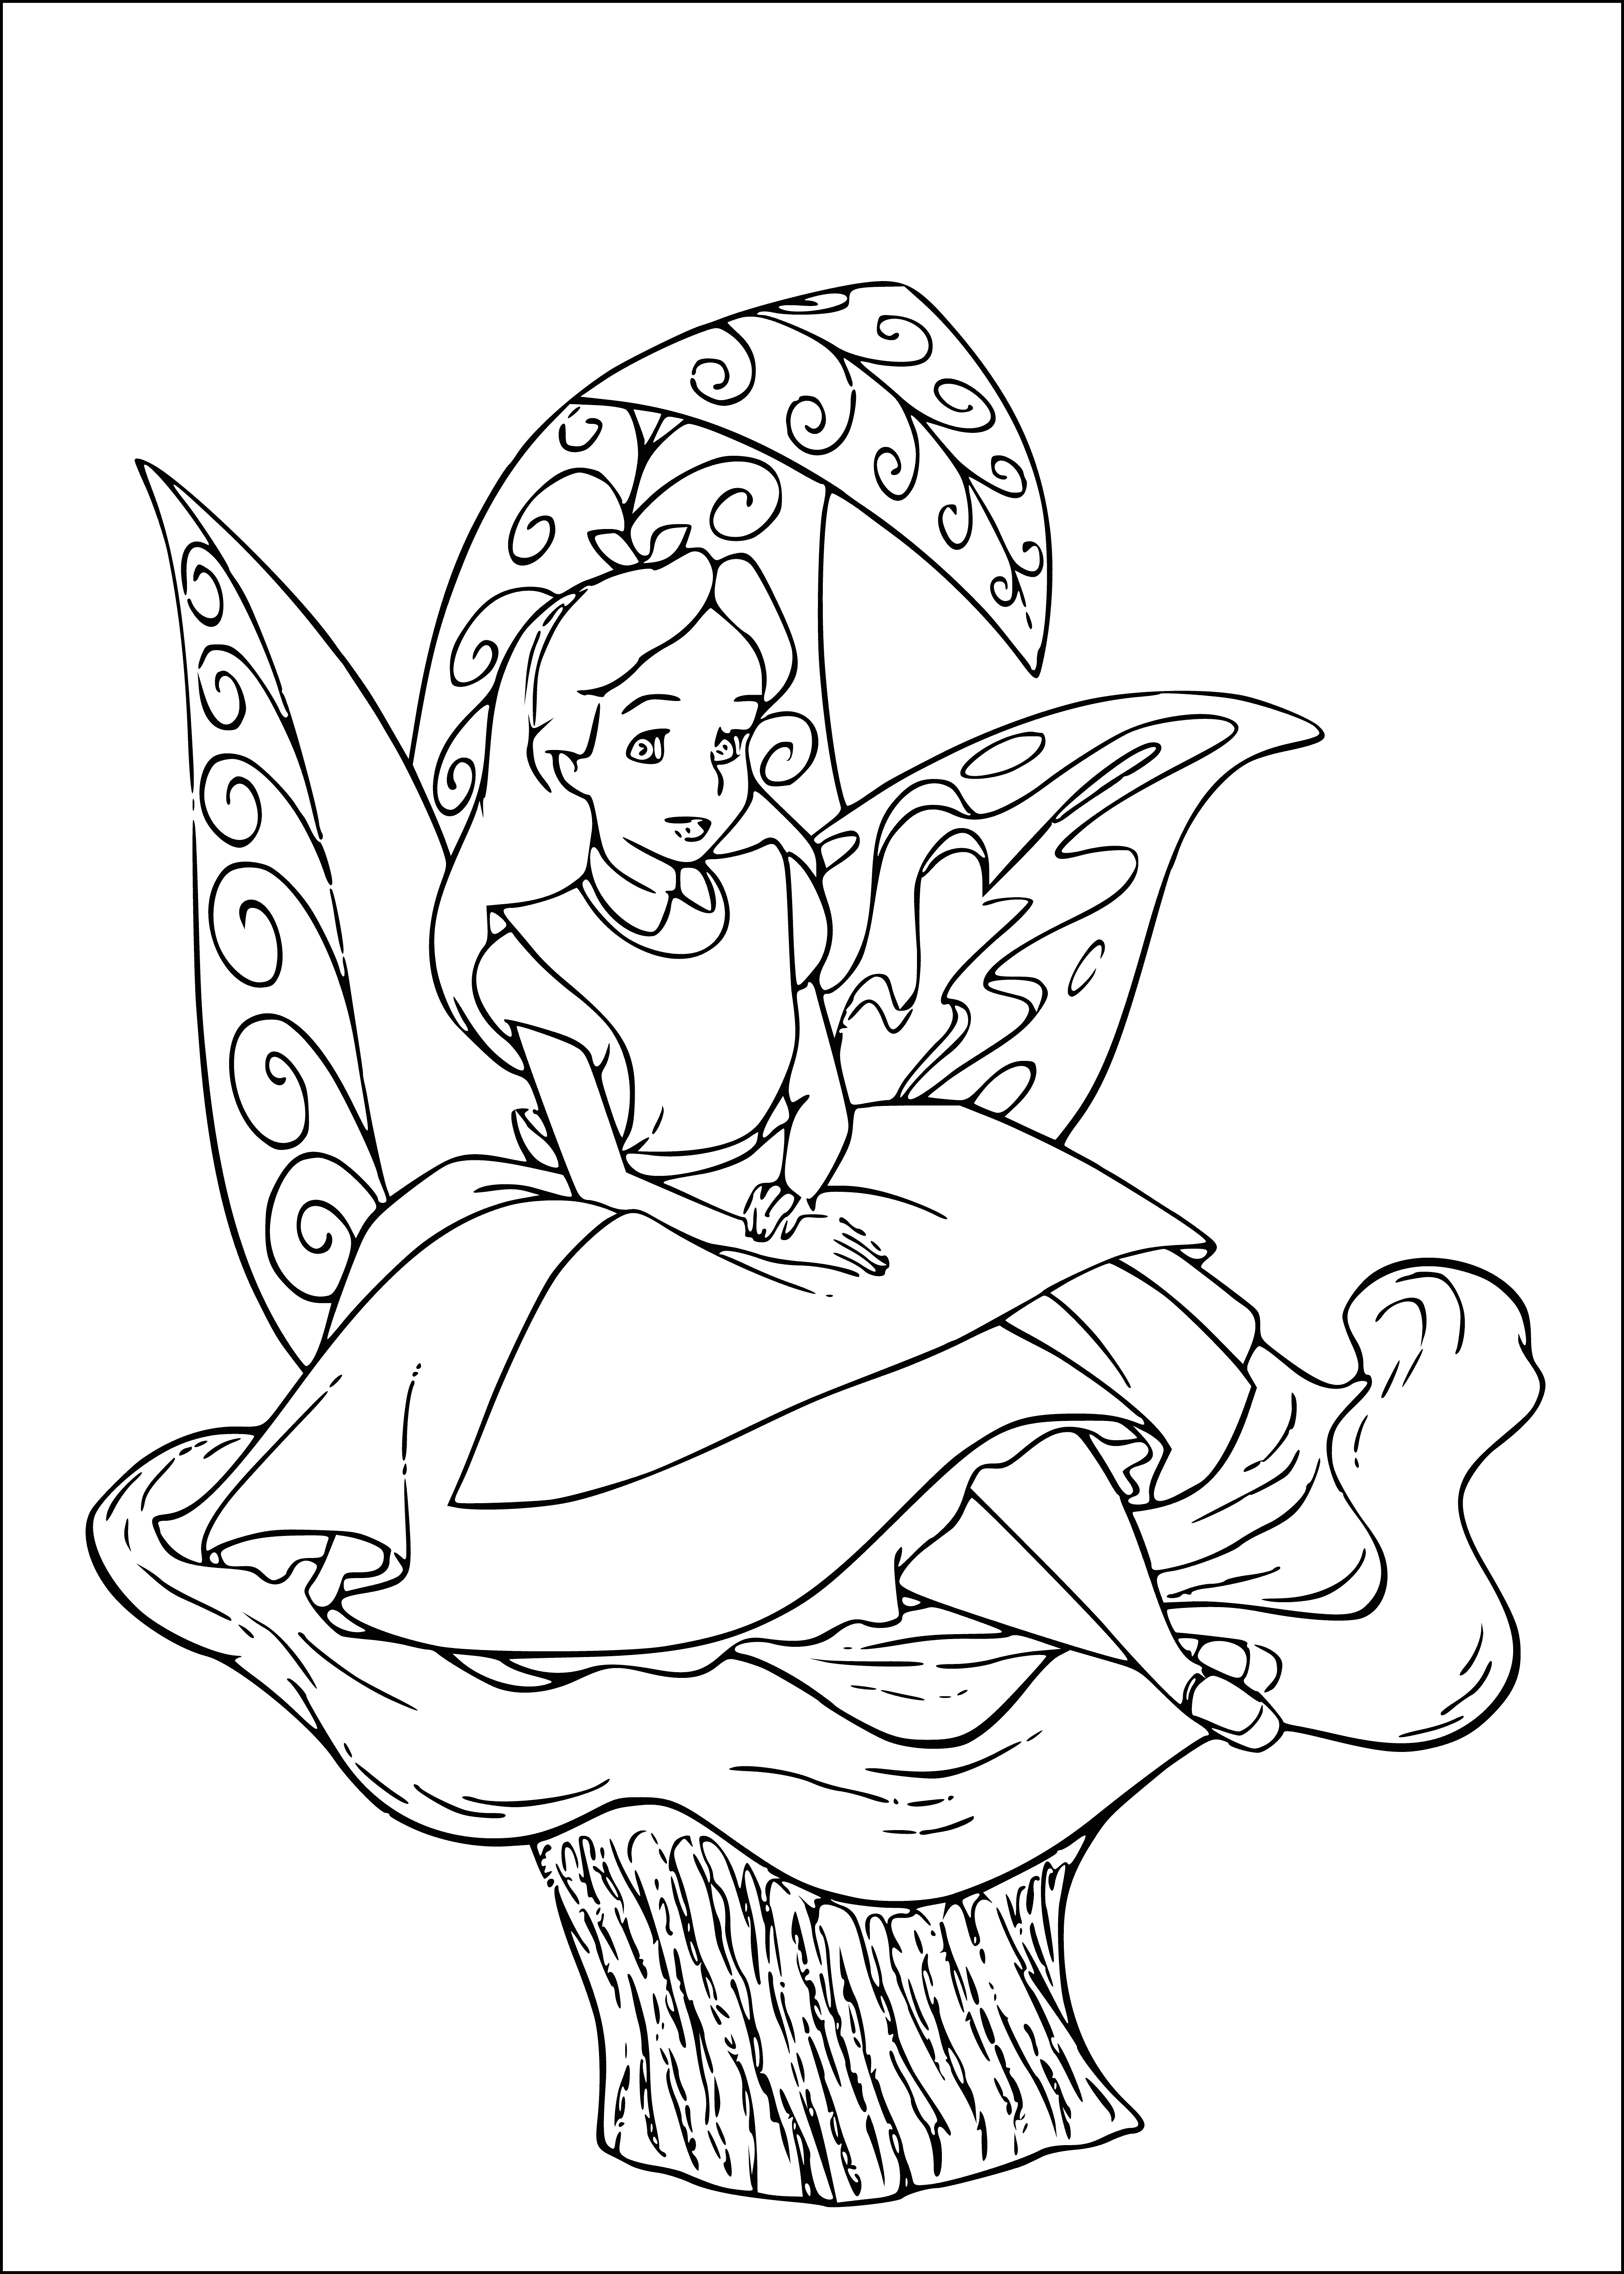 Alice on the Mushroom coloring page